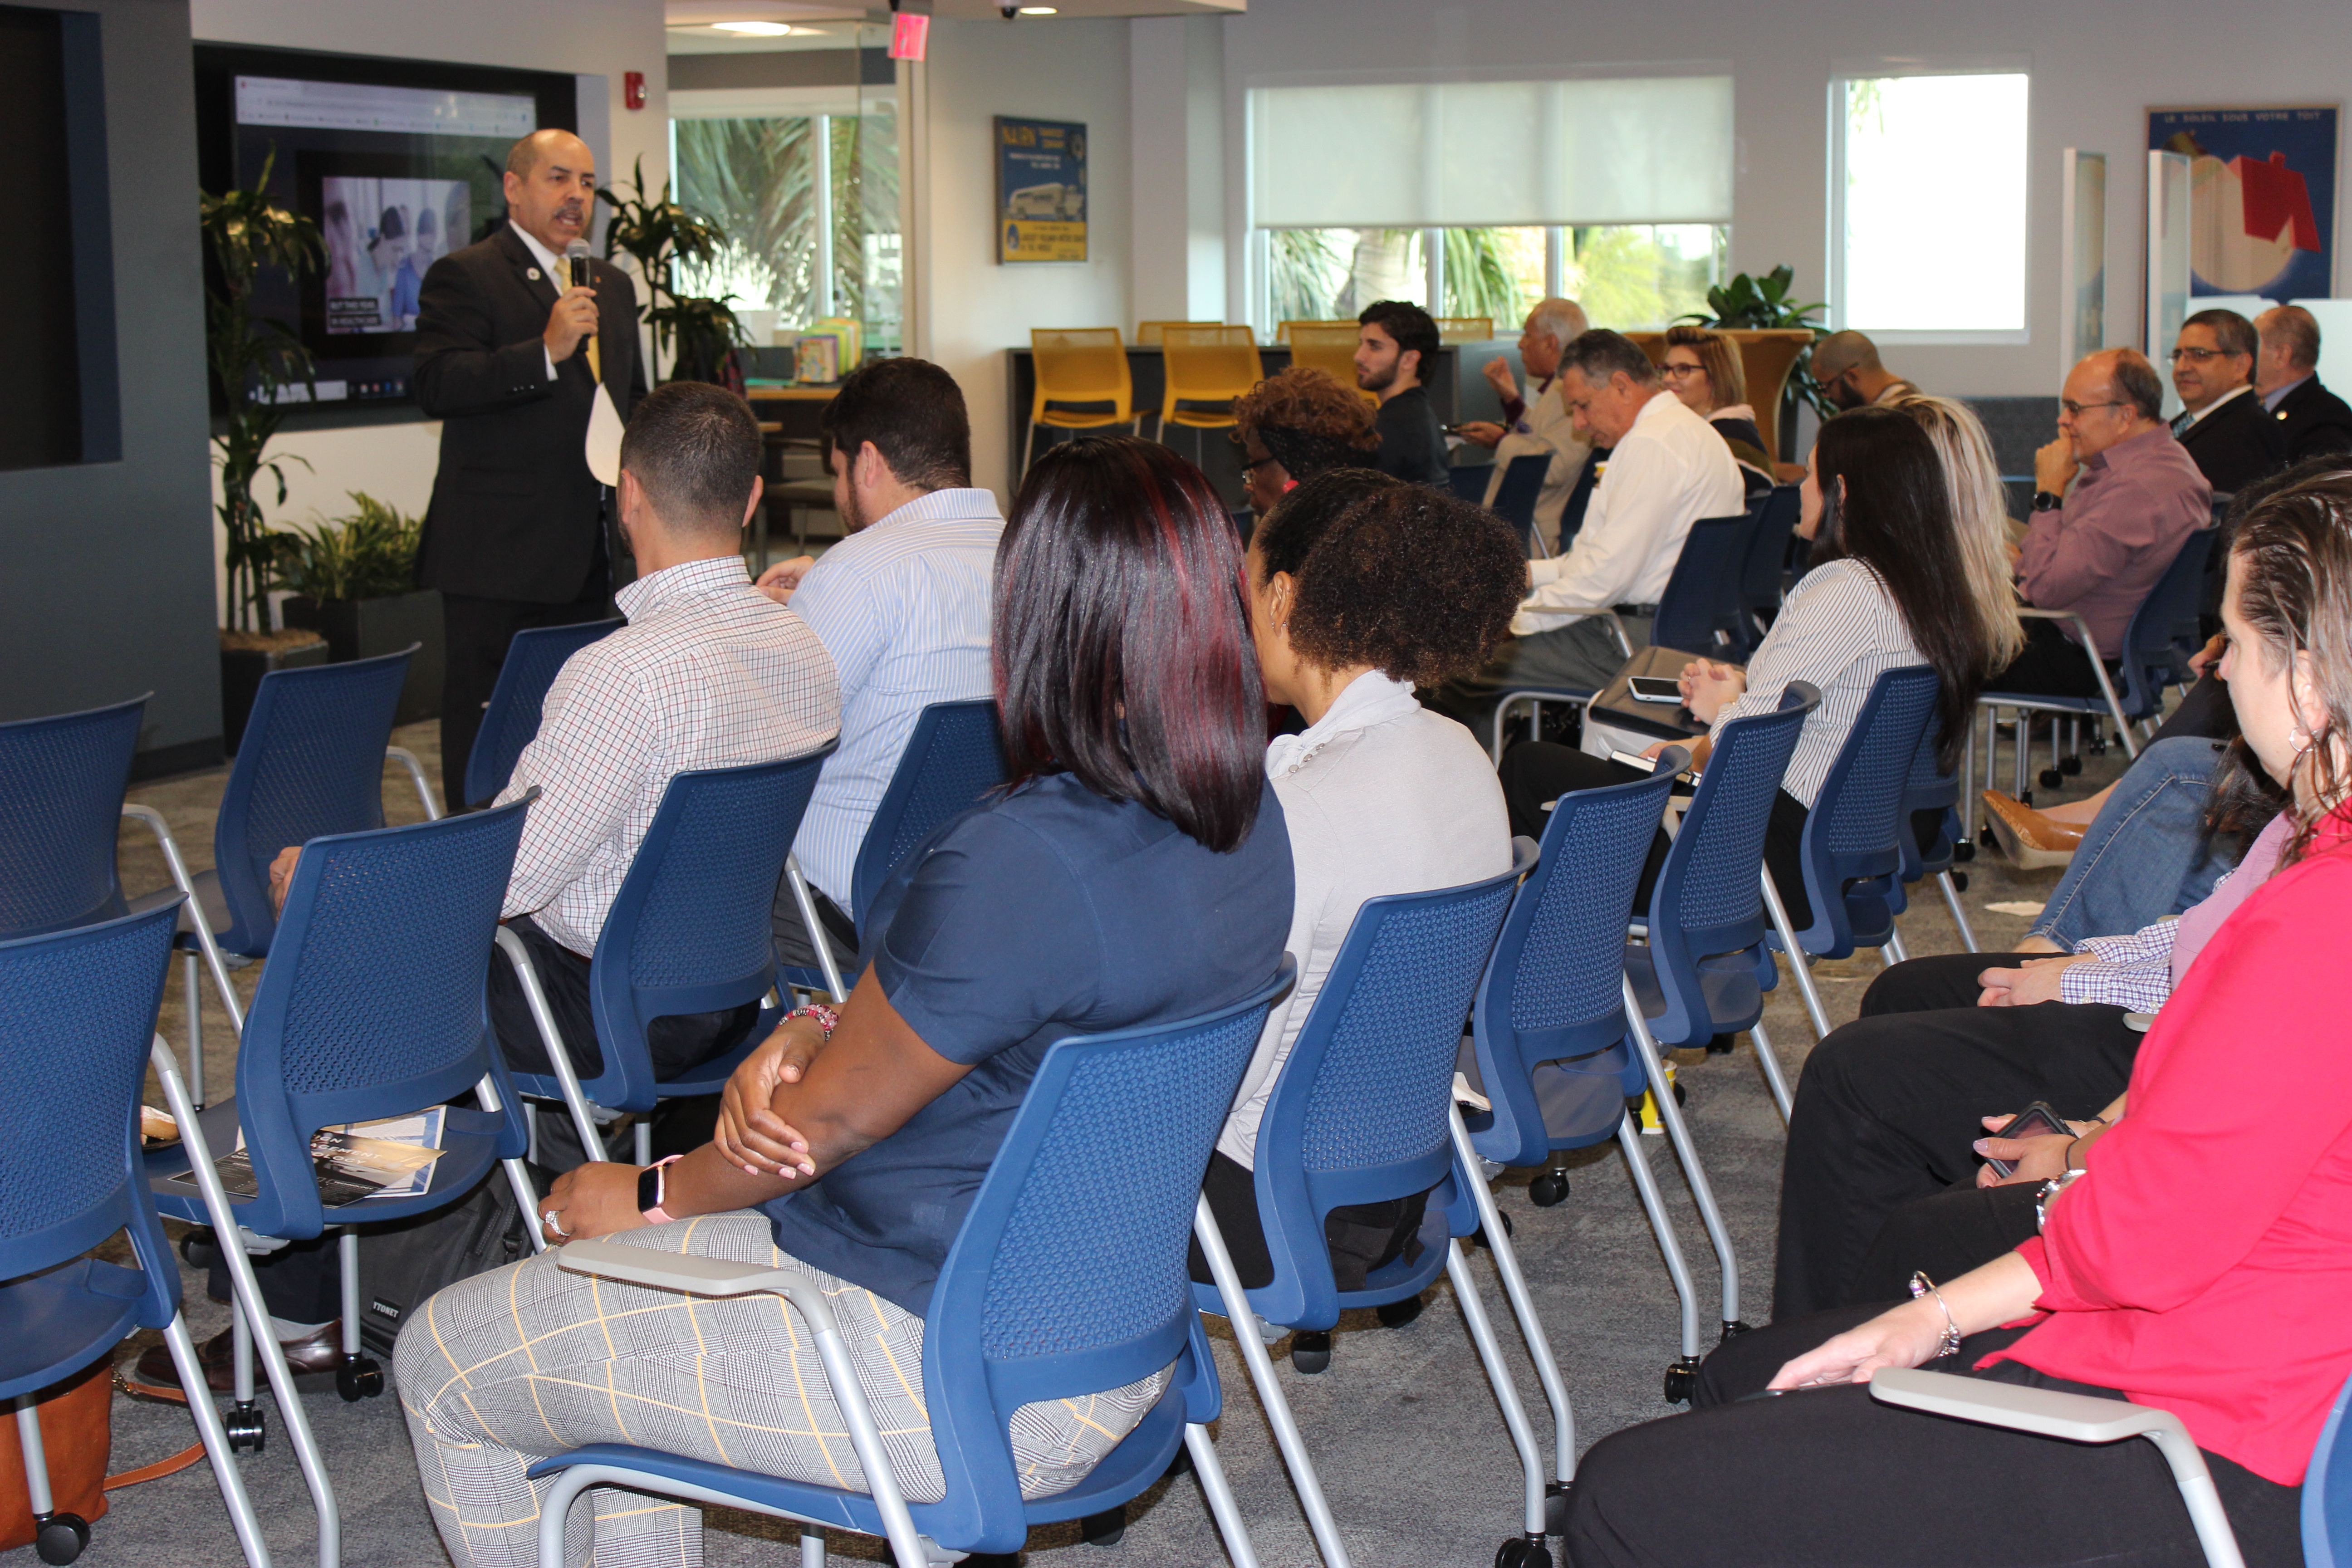 Doral Chamber of Commerce introduces DCC 21st Century Technology event, members learning about the latest technology from Manny Sarmiento.